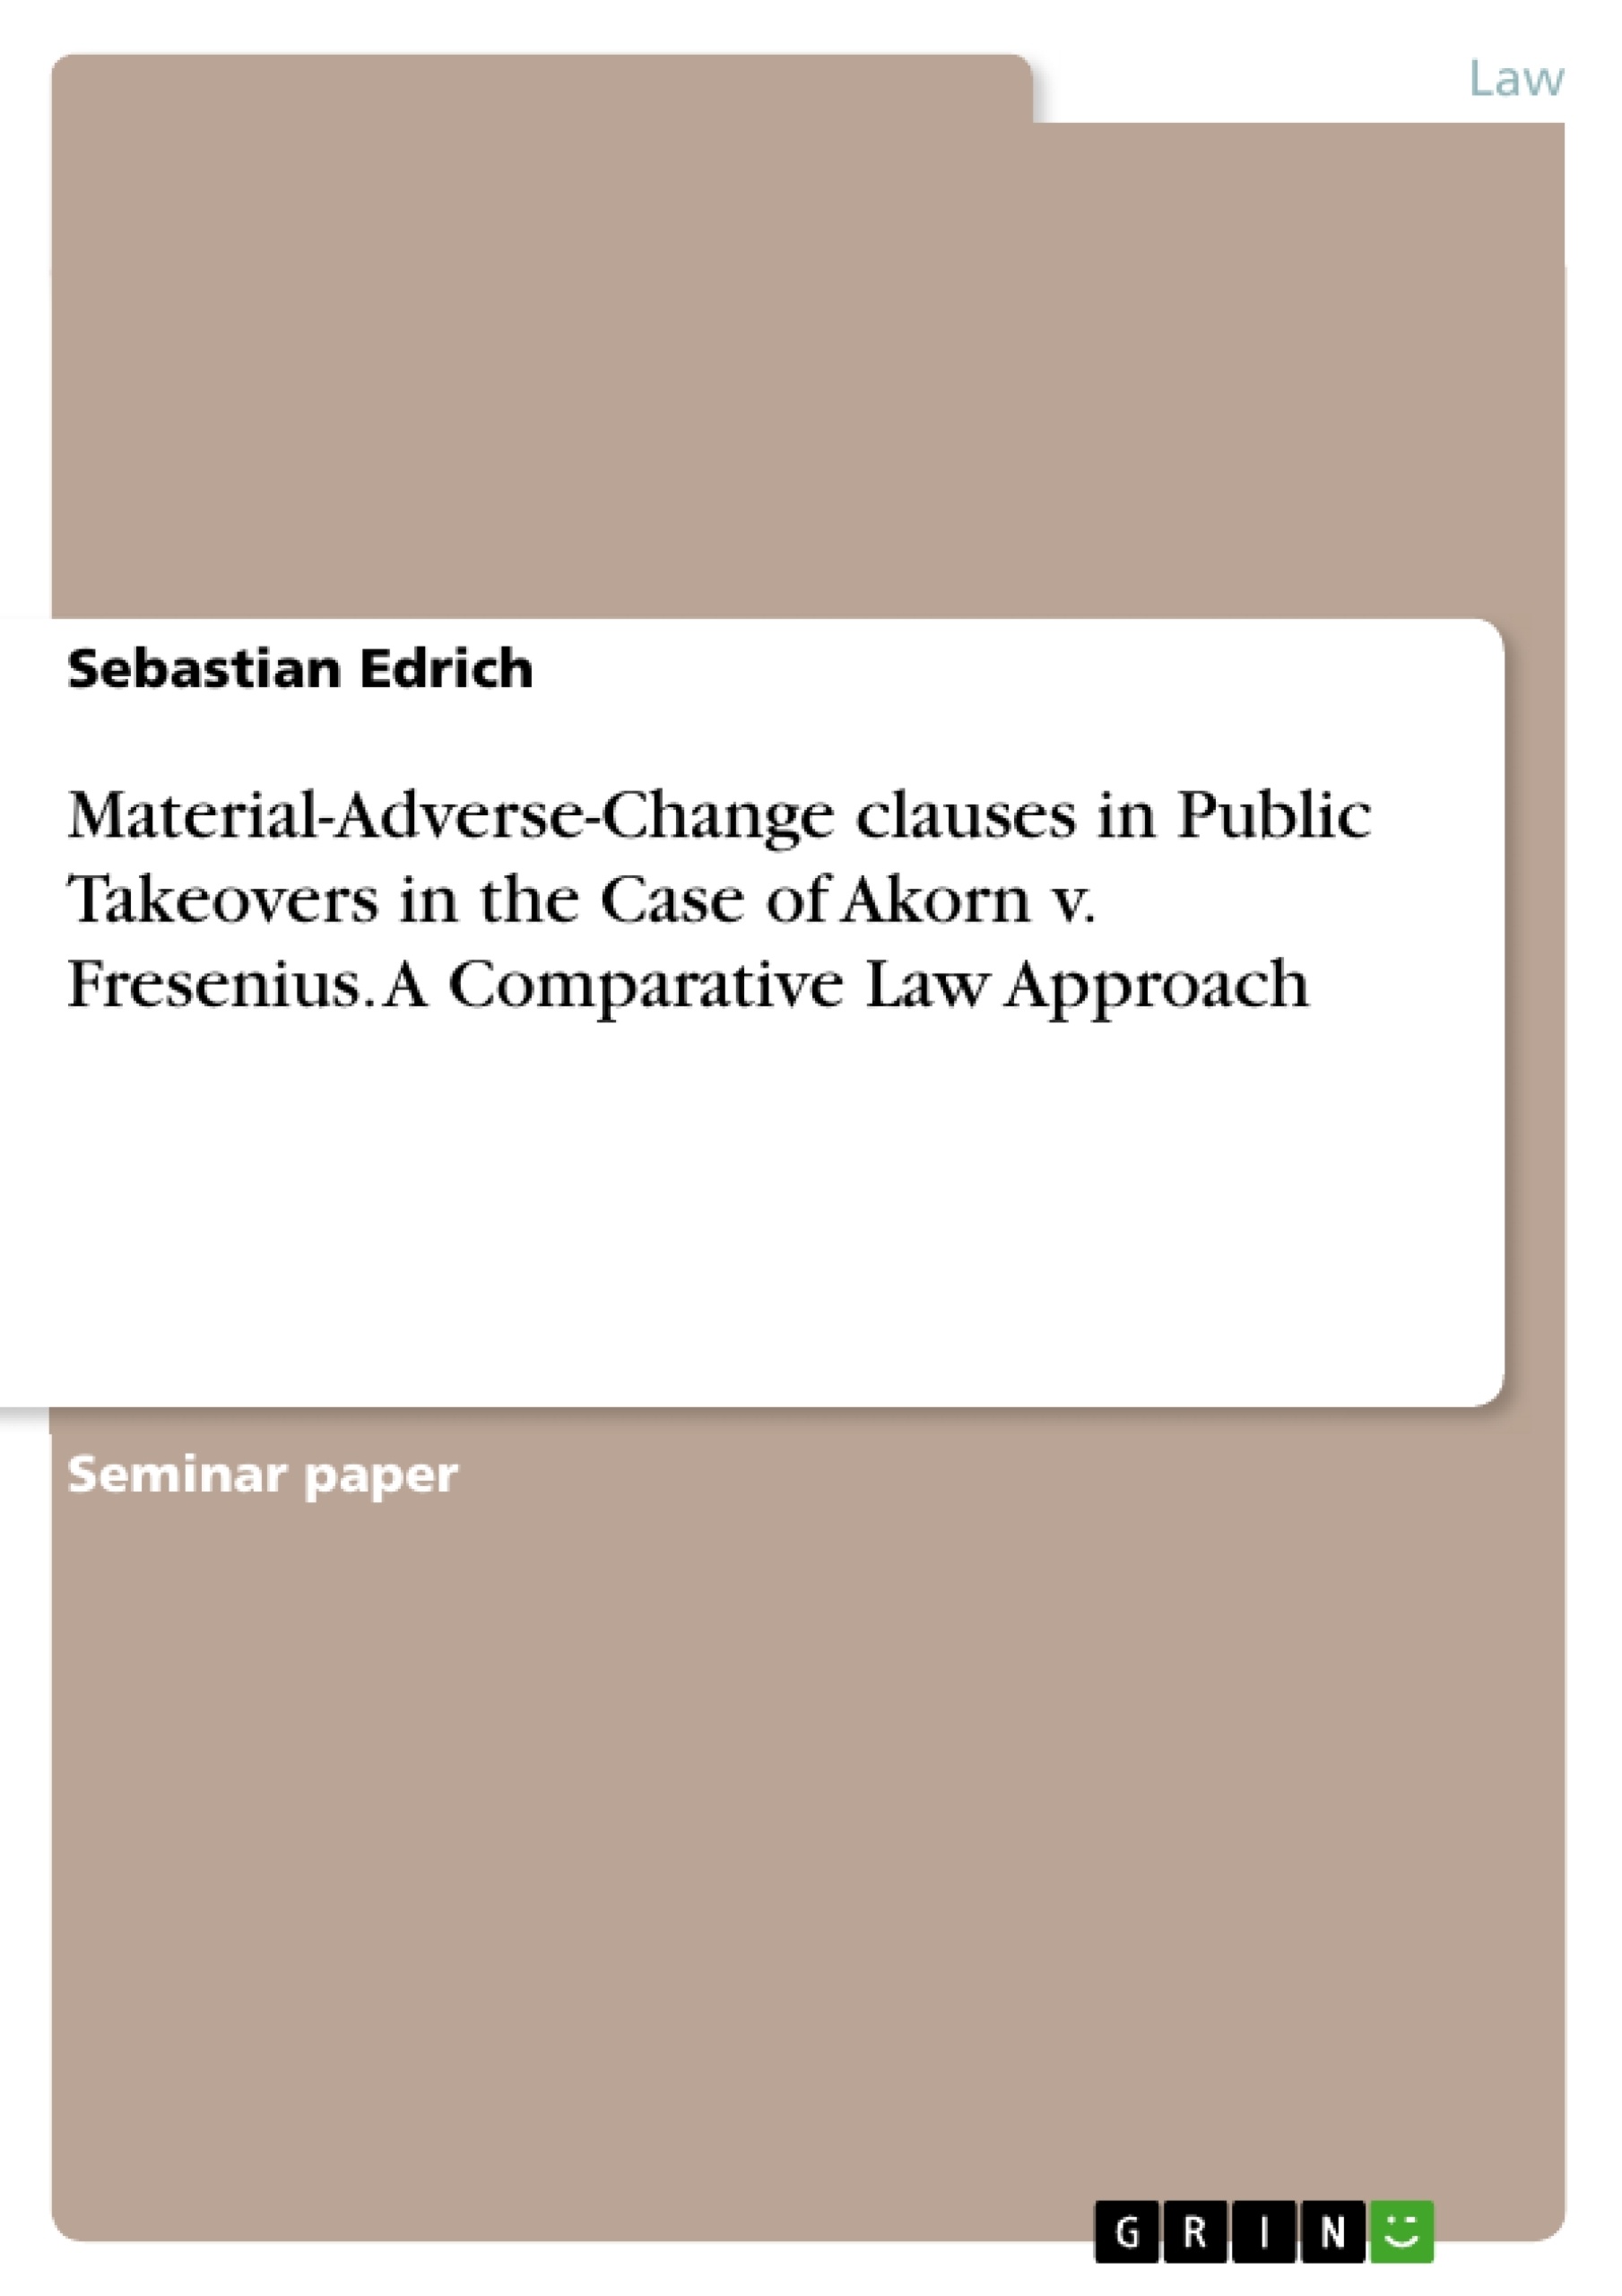 Título: Material-Adverse-Change clauses in Public Takeovers in the Case of Akorn v. Fresenius. A Comparative Law Approach